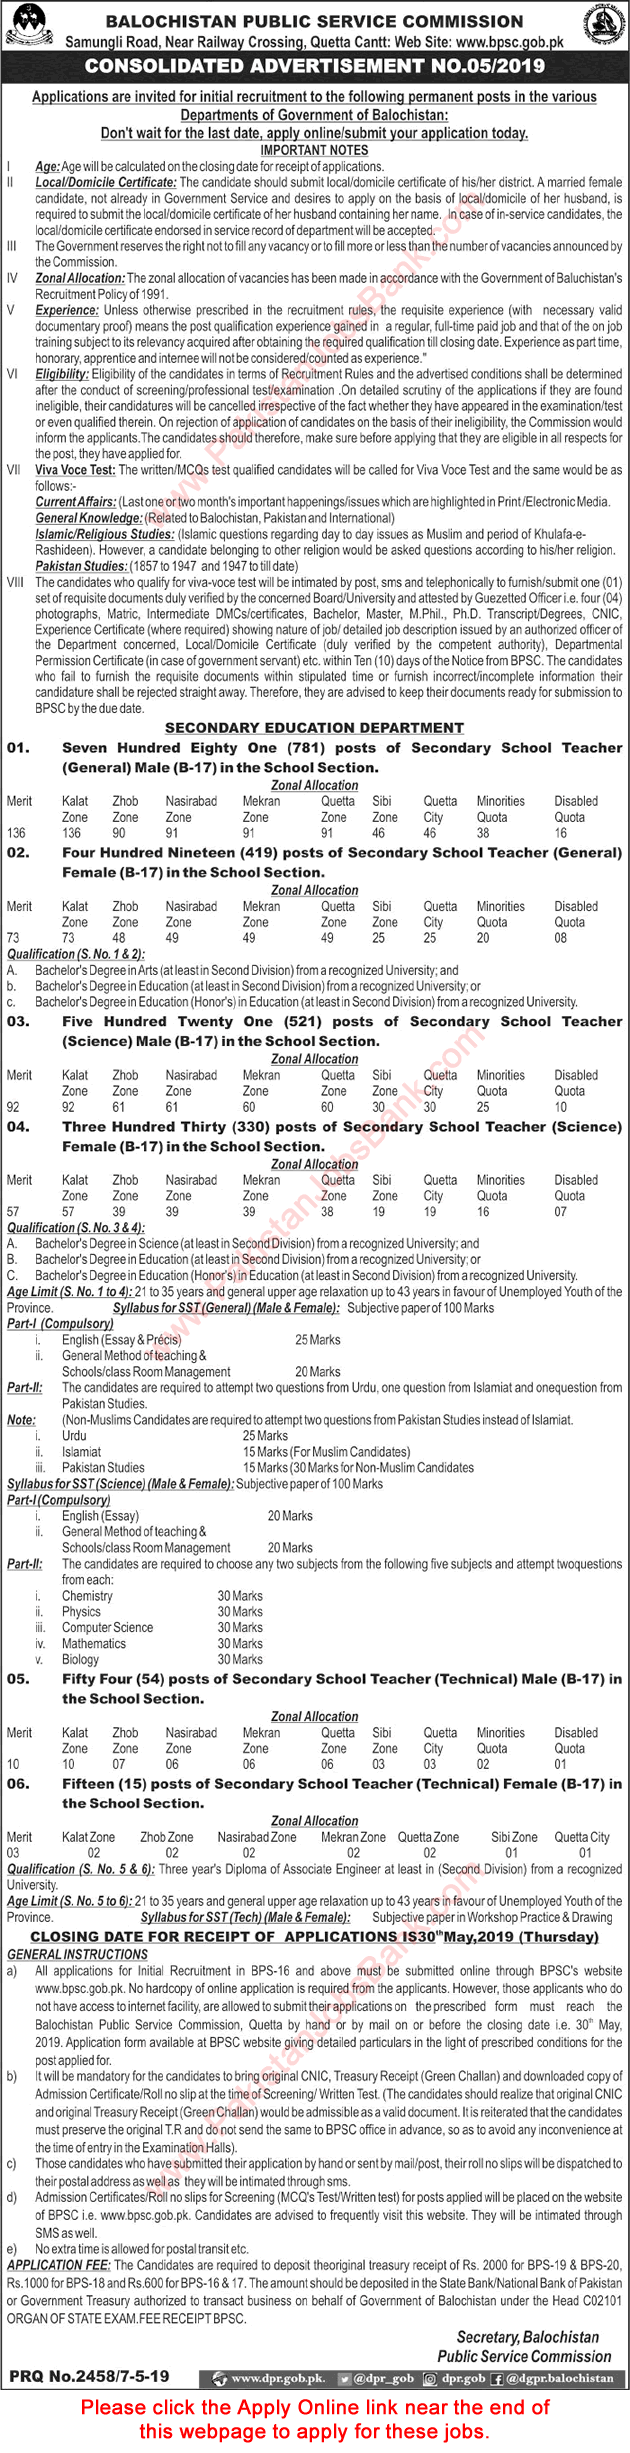 Secondary School Teacher Jobs in Secondary Education Department Balochistan 2019 May BPSC Apply Online Latest